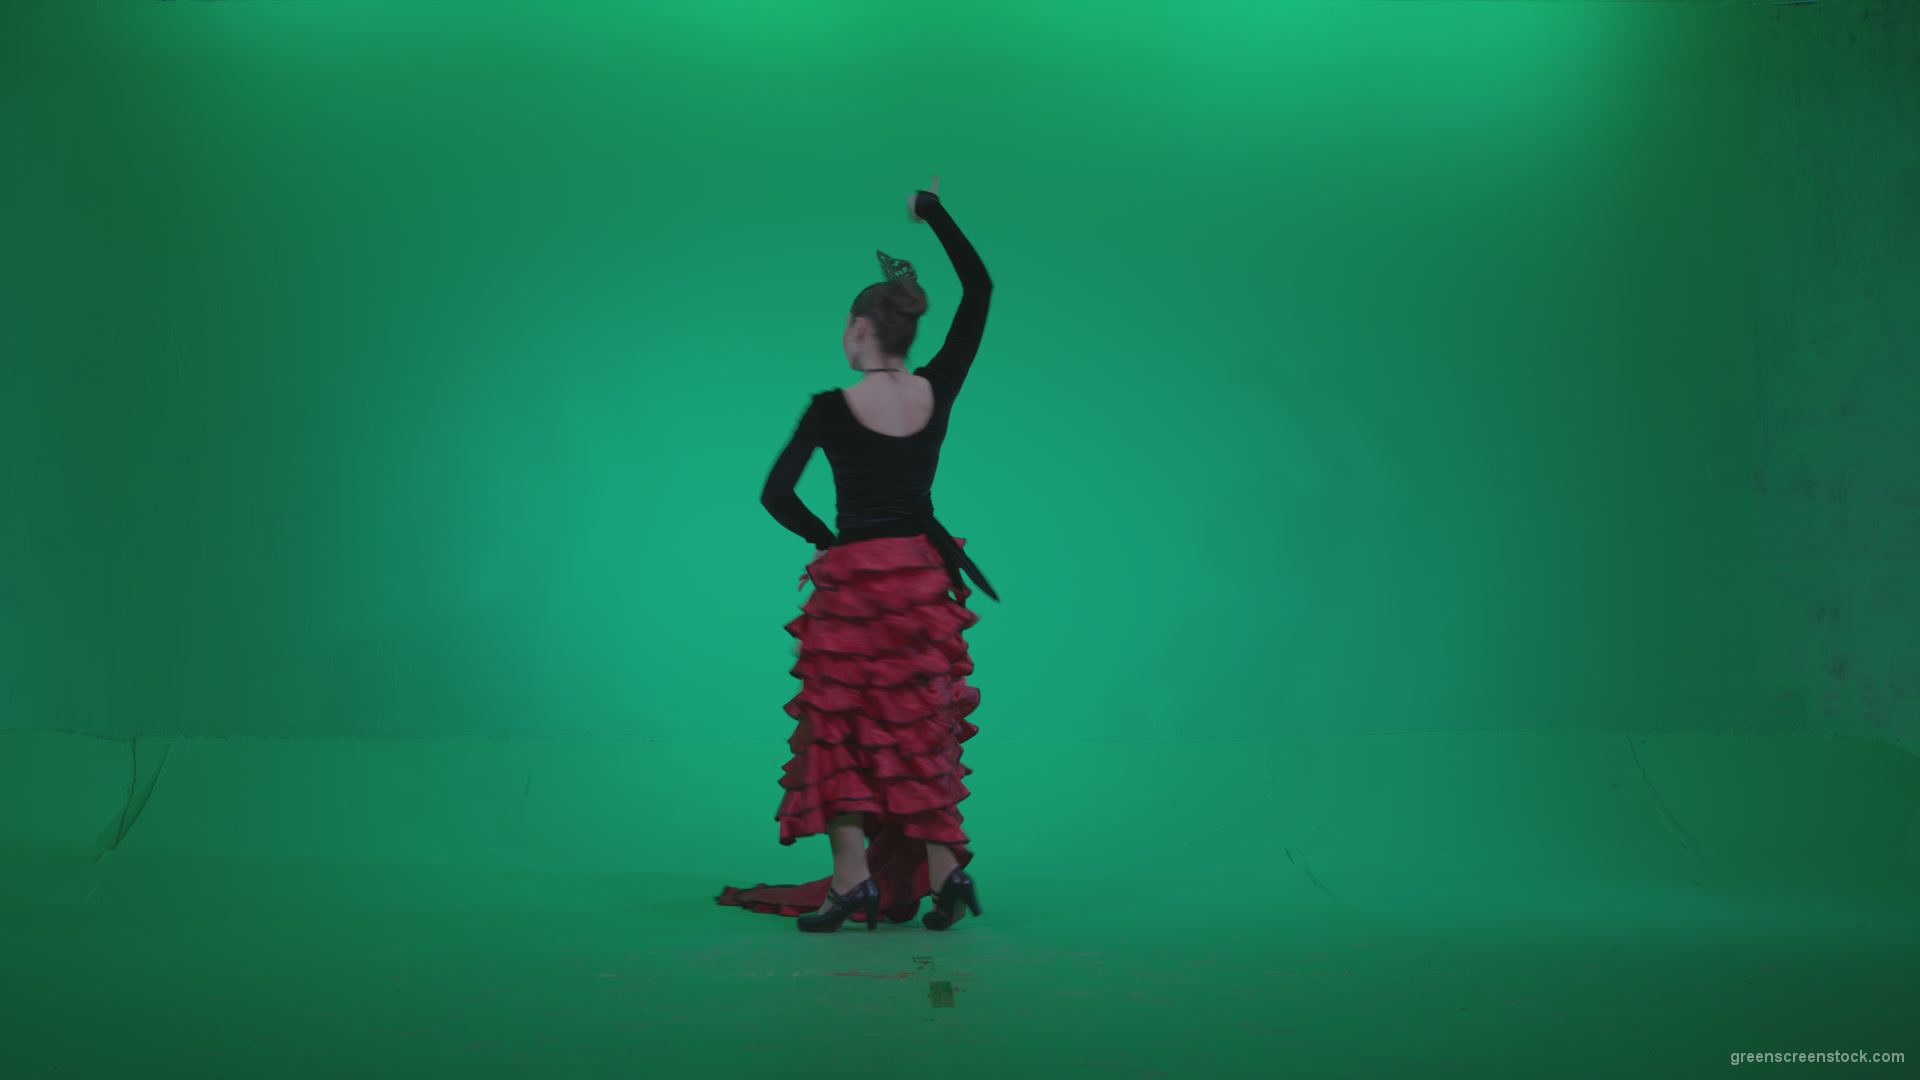 Flamenco-Red-and-Black-Dress-rb12-Green-Screen-Video-Footage_002 Green Screen Stock